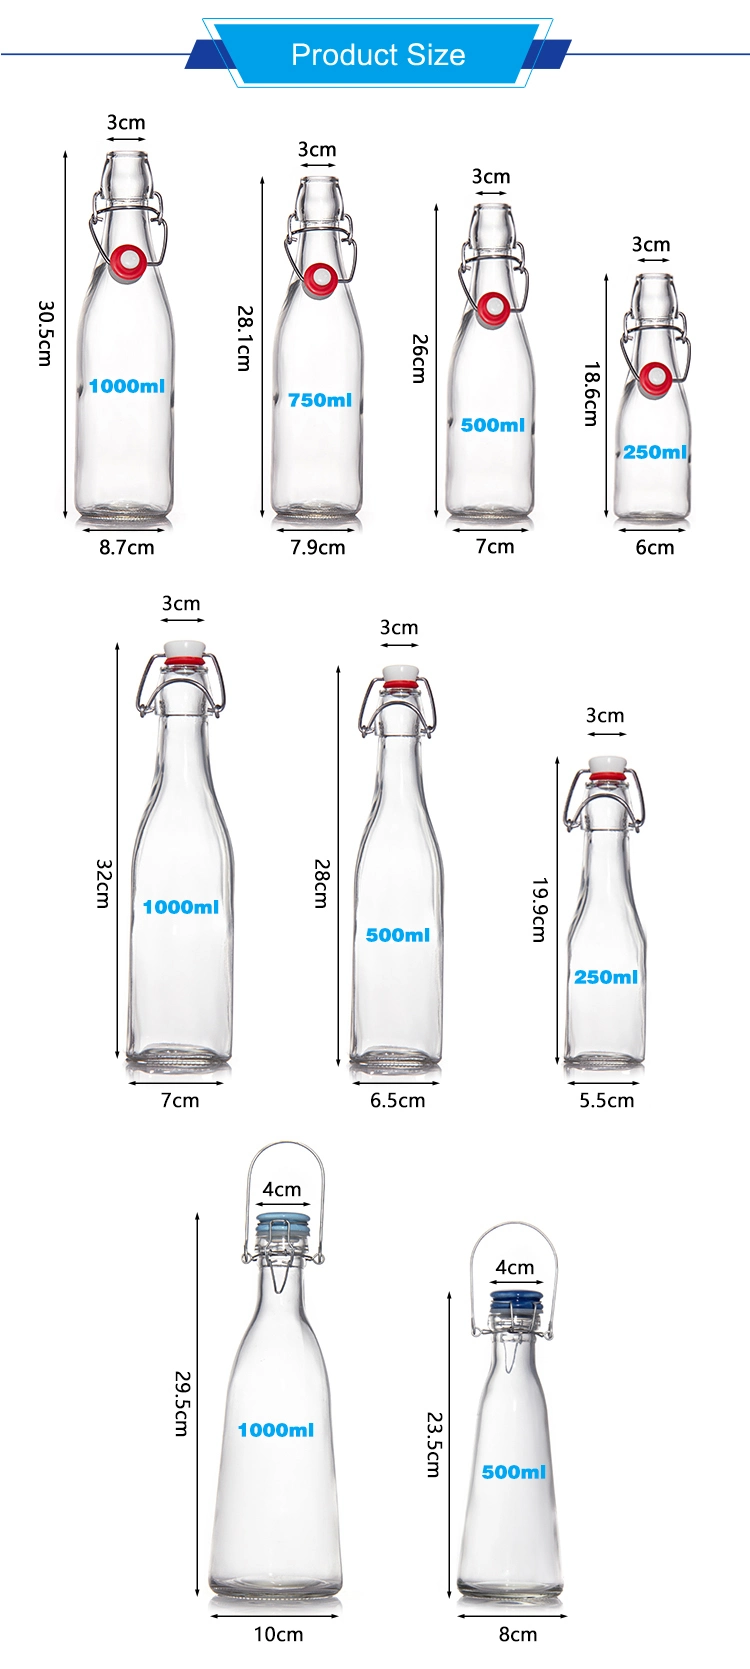 Factory Price 200ml 250ml 500ml 750ml 1000ml Glass Water Juice Canister with Clip Lid